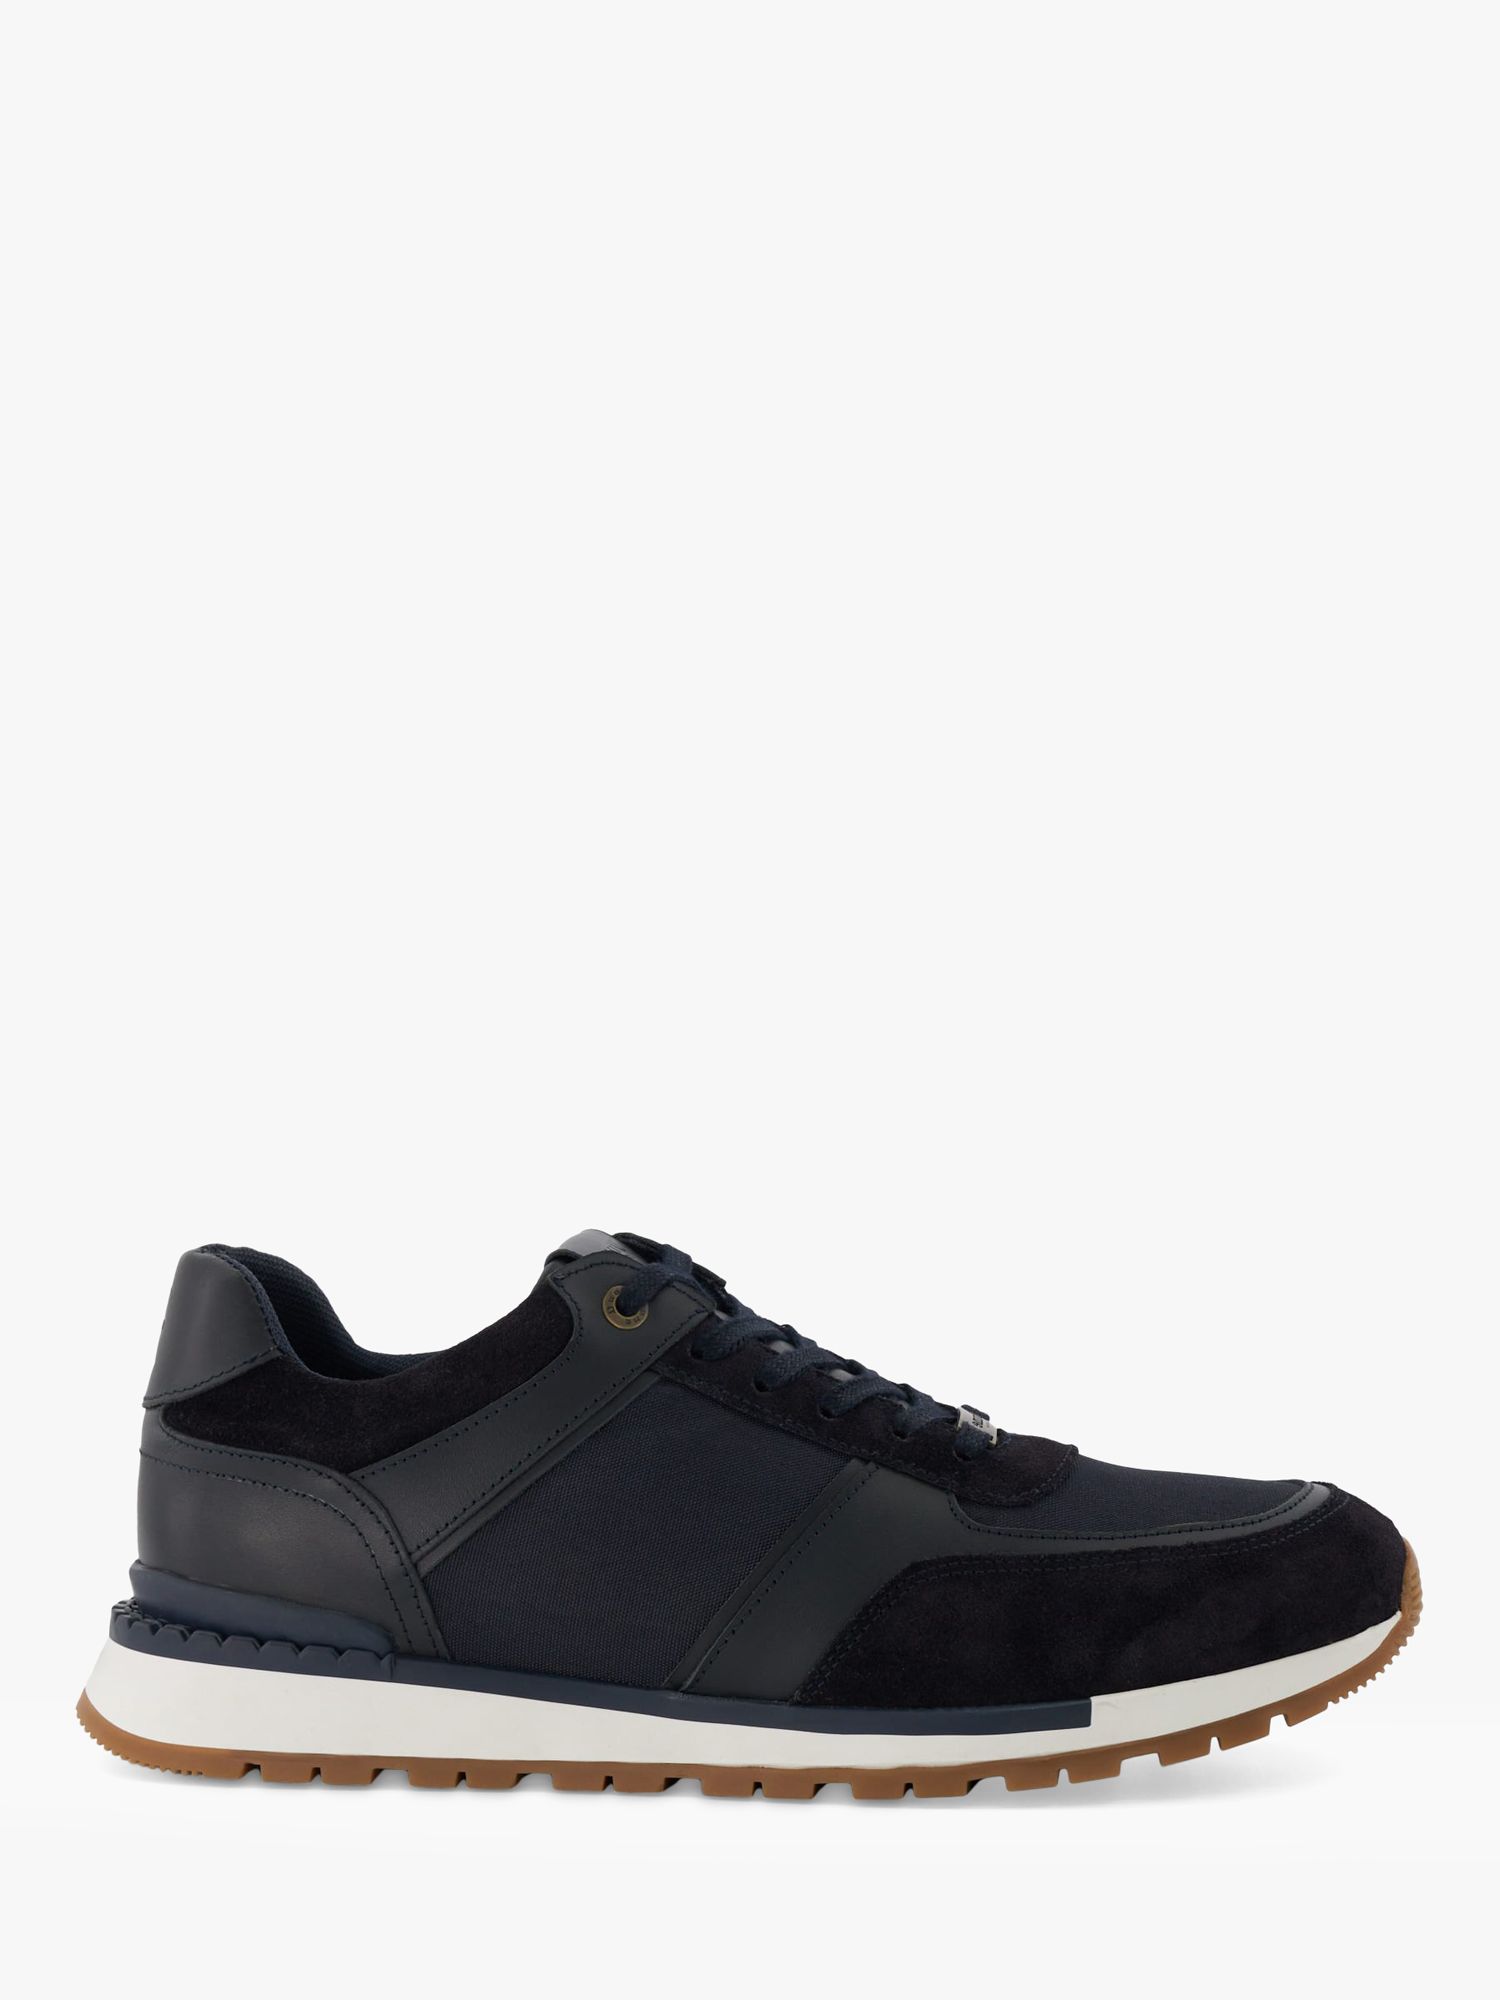 Dune Titles Suede and Leather Trainers, Navy at John Lewis & Partners